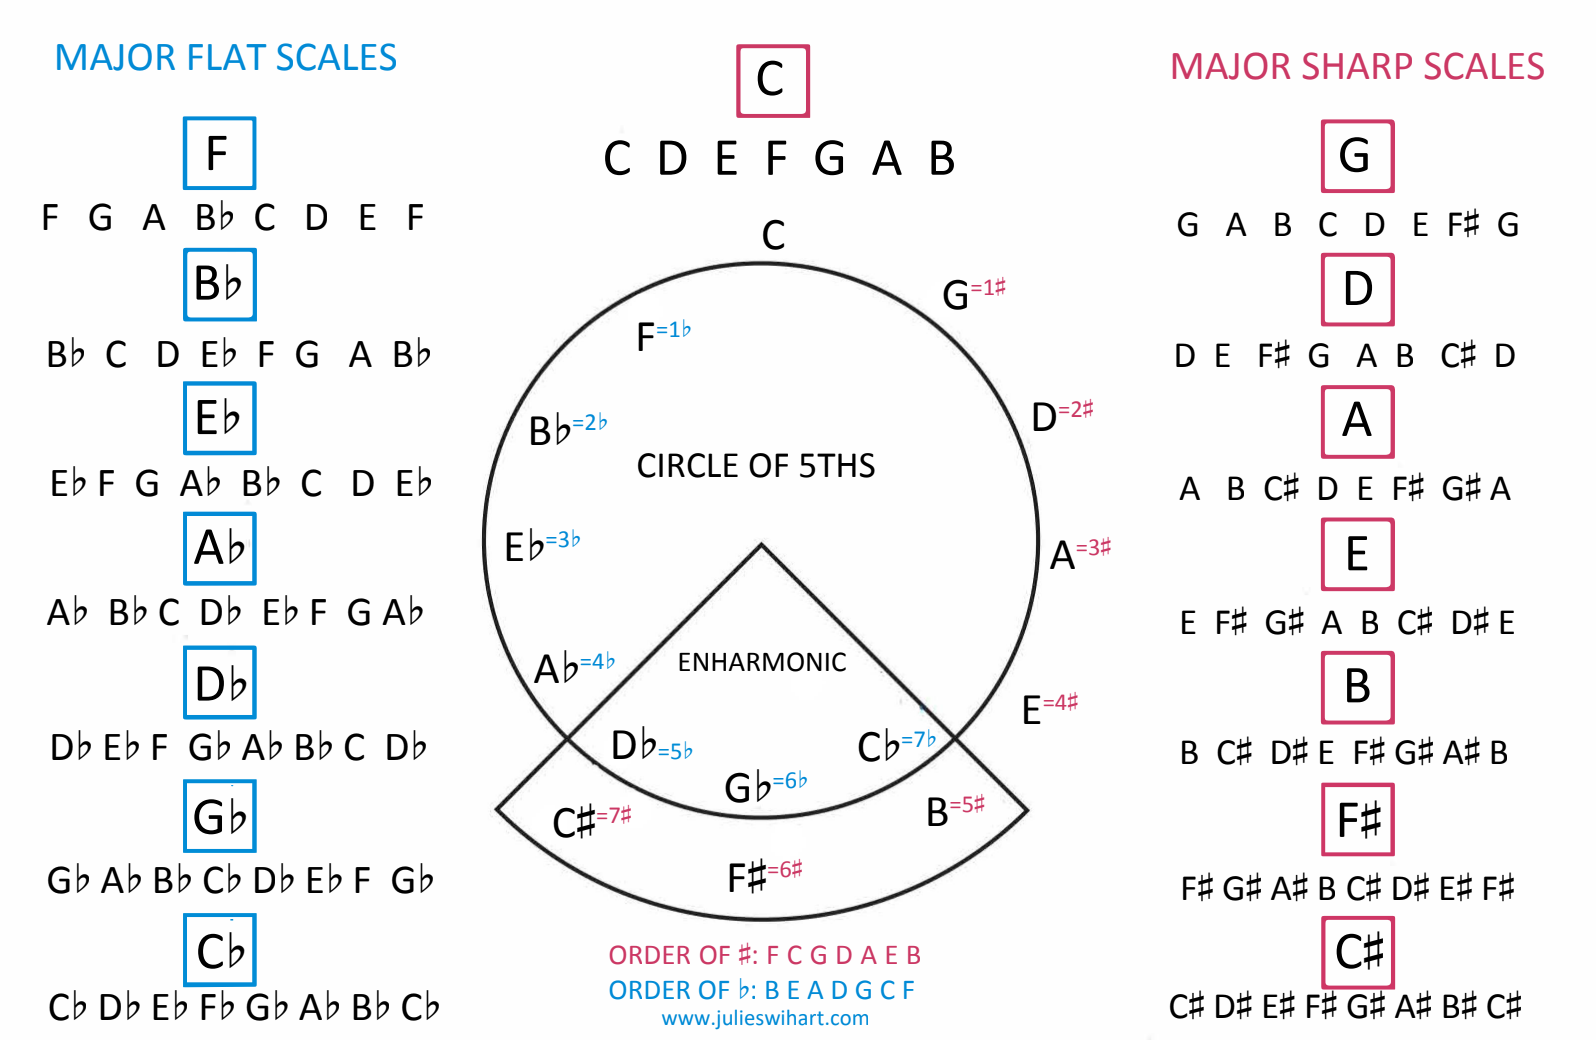 Circle of 5ths with all 15 keys